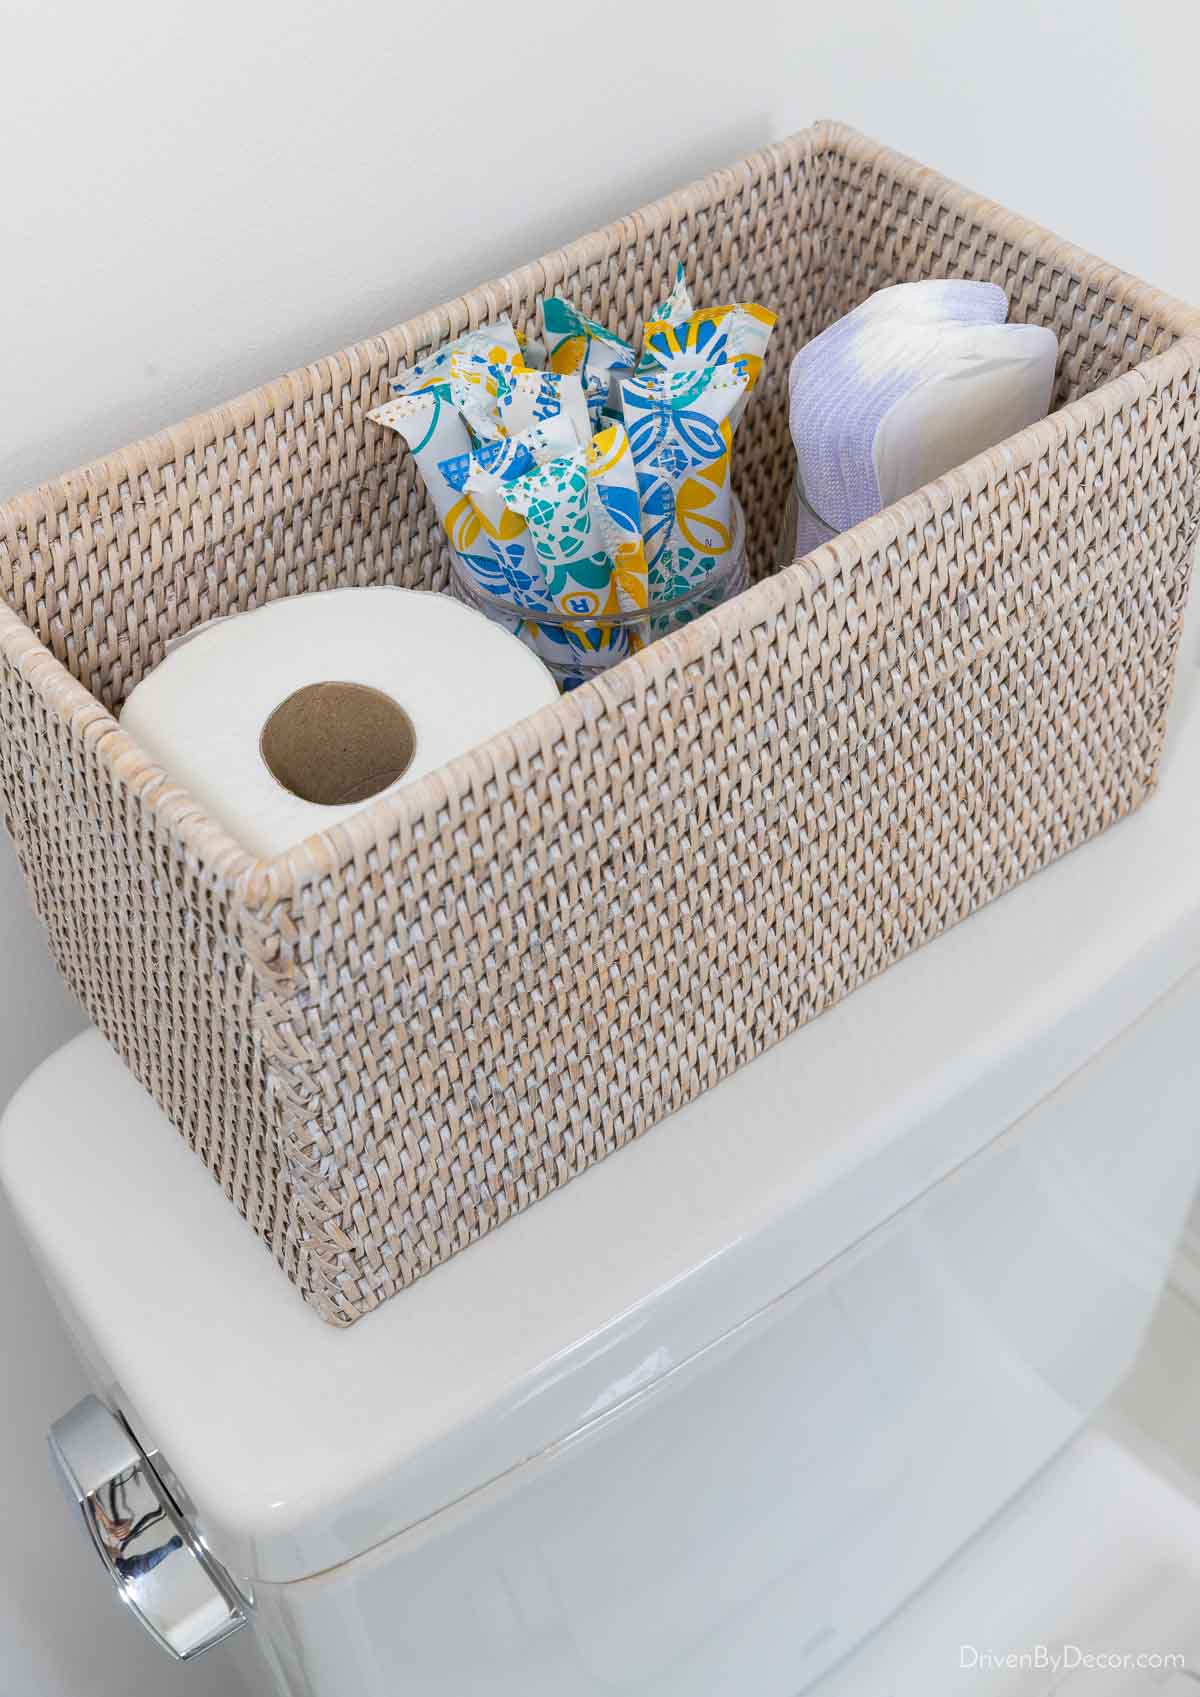 Woven storage box on toilet tank holding toilet paper and menstrual products